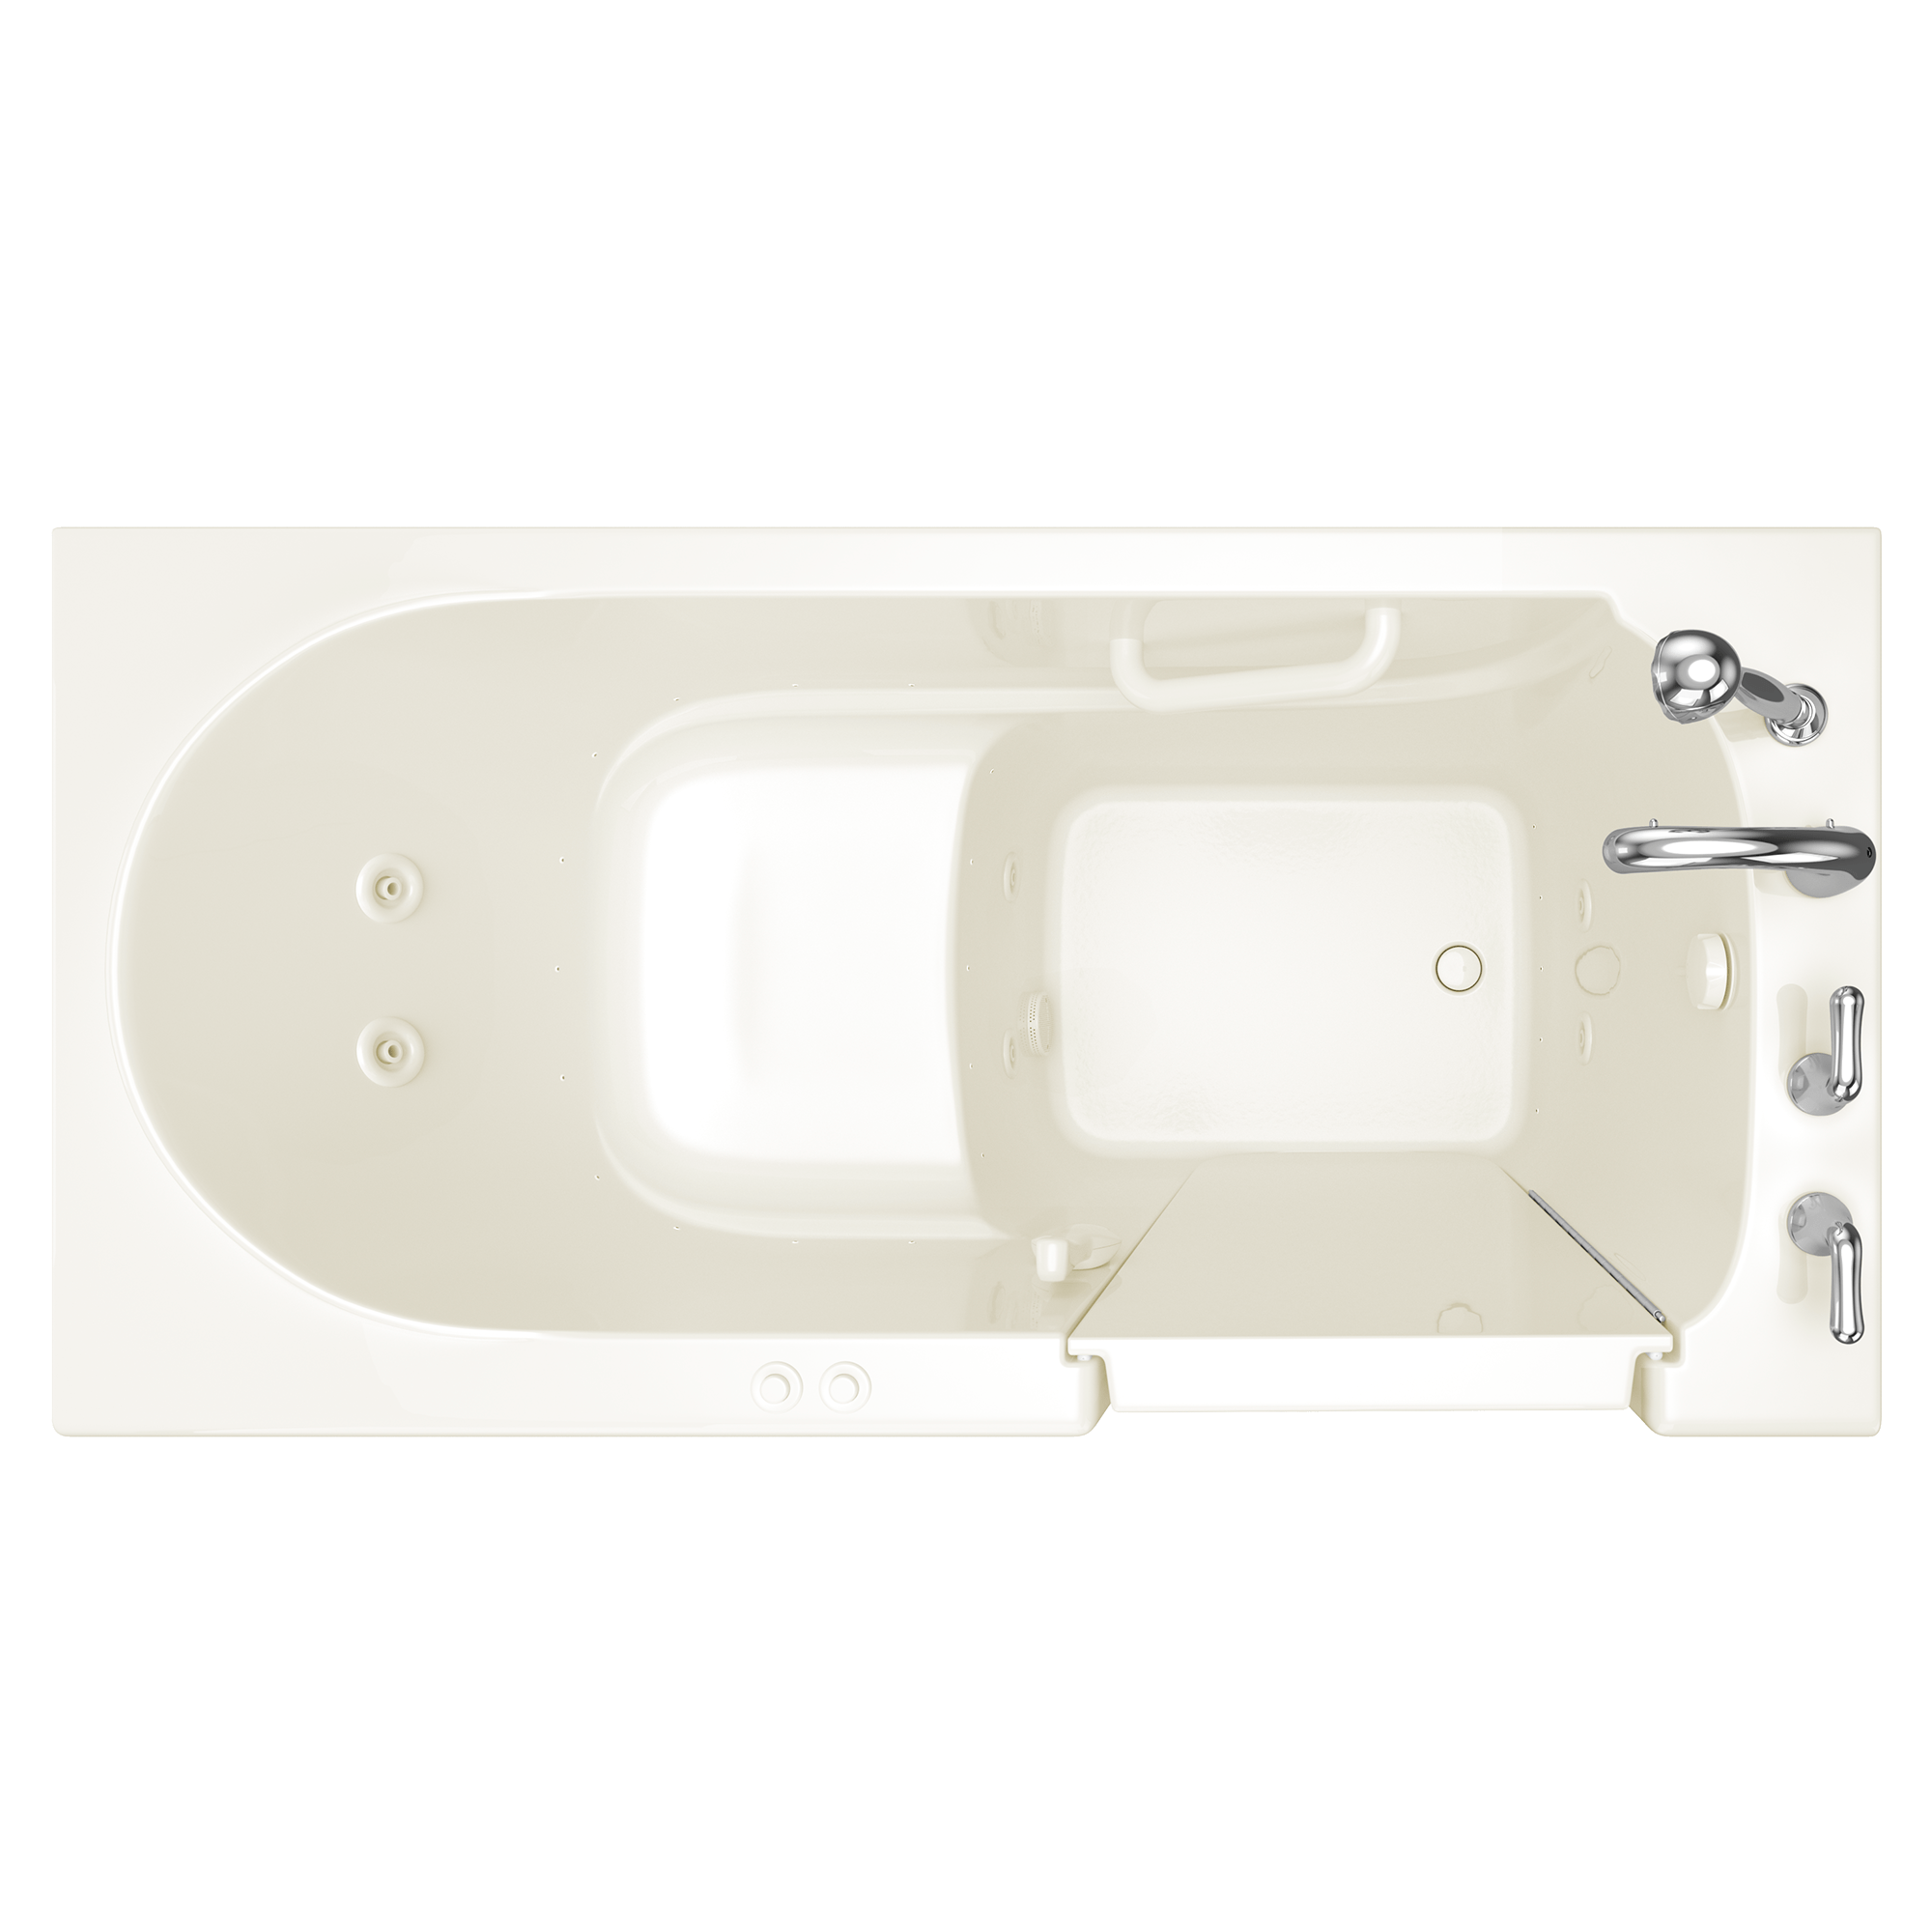 Gelcoat Entry Series 60 x 30 Inch Walk In Tub With Combination Air Spa and Whirlpool Systems - Right Hand Drain With Faucet ST BISCUIT